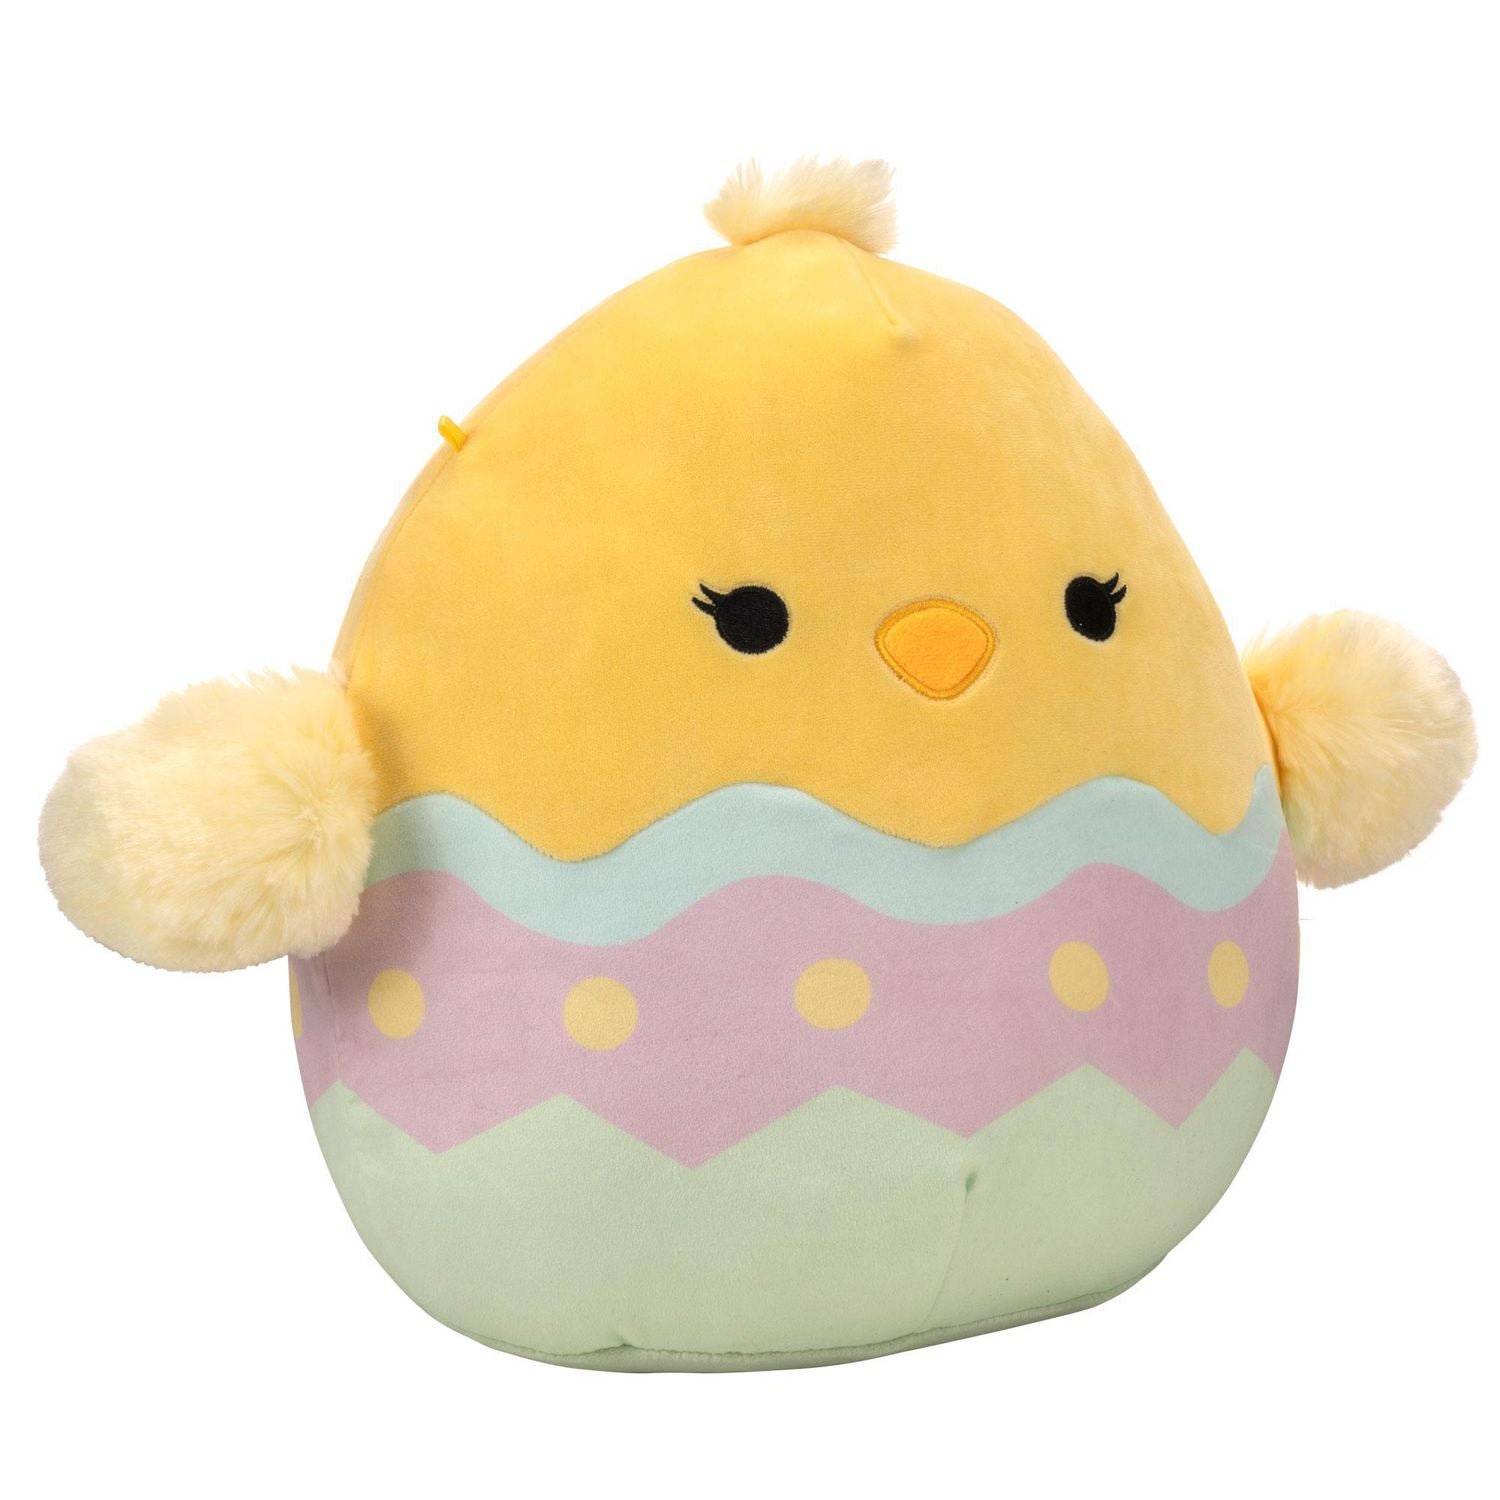 Original Squishmallow 12 Inch Aimee Easter Chick